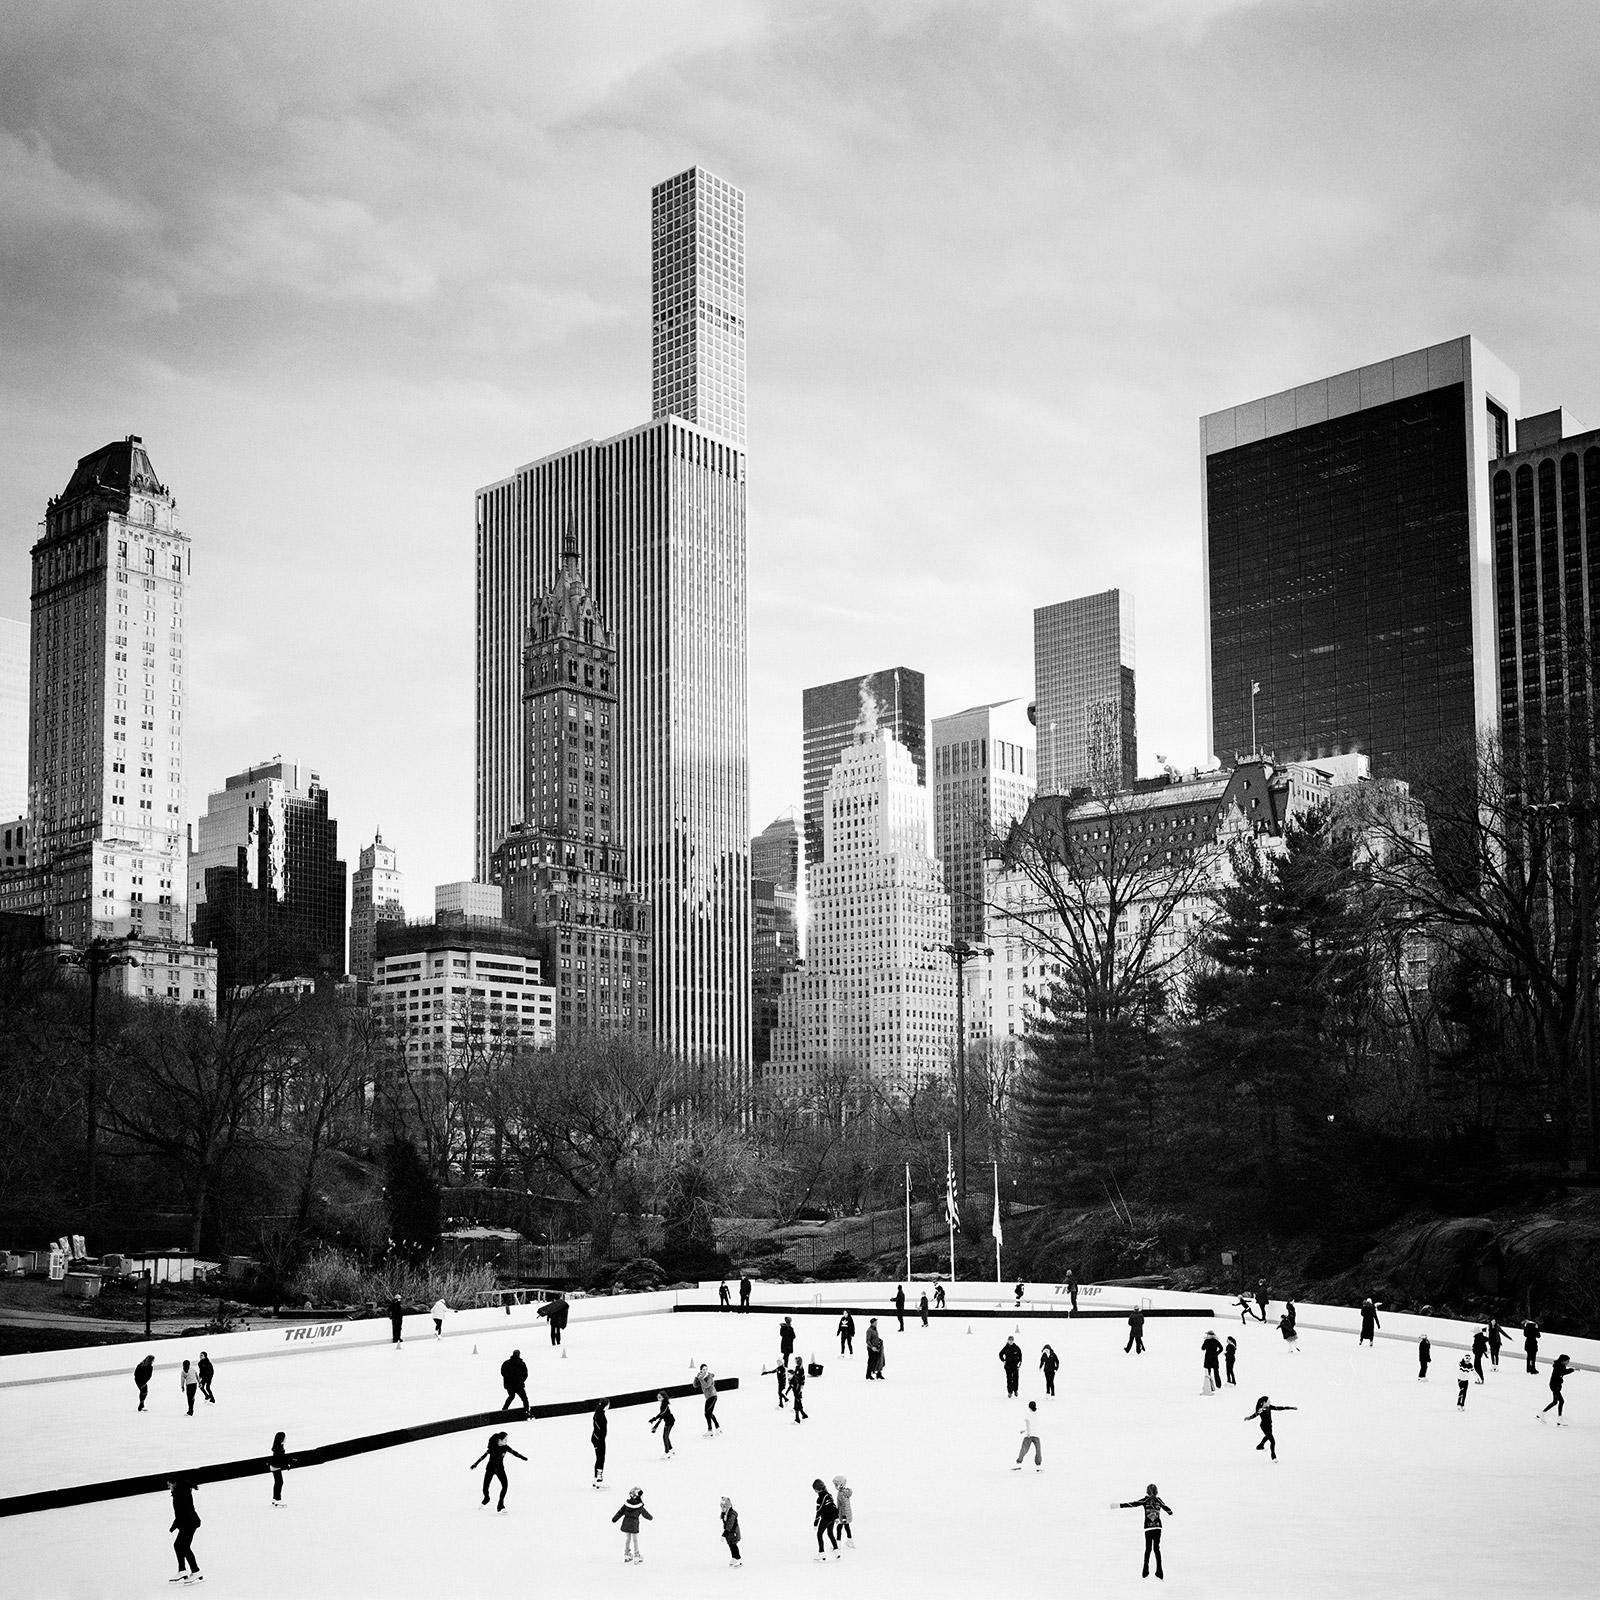 Dancing on Ice, skyscraper, New York, USA, black and white photography cityscape